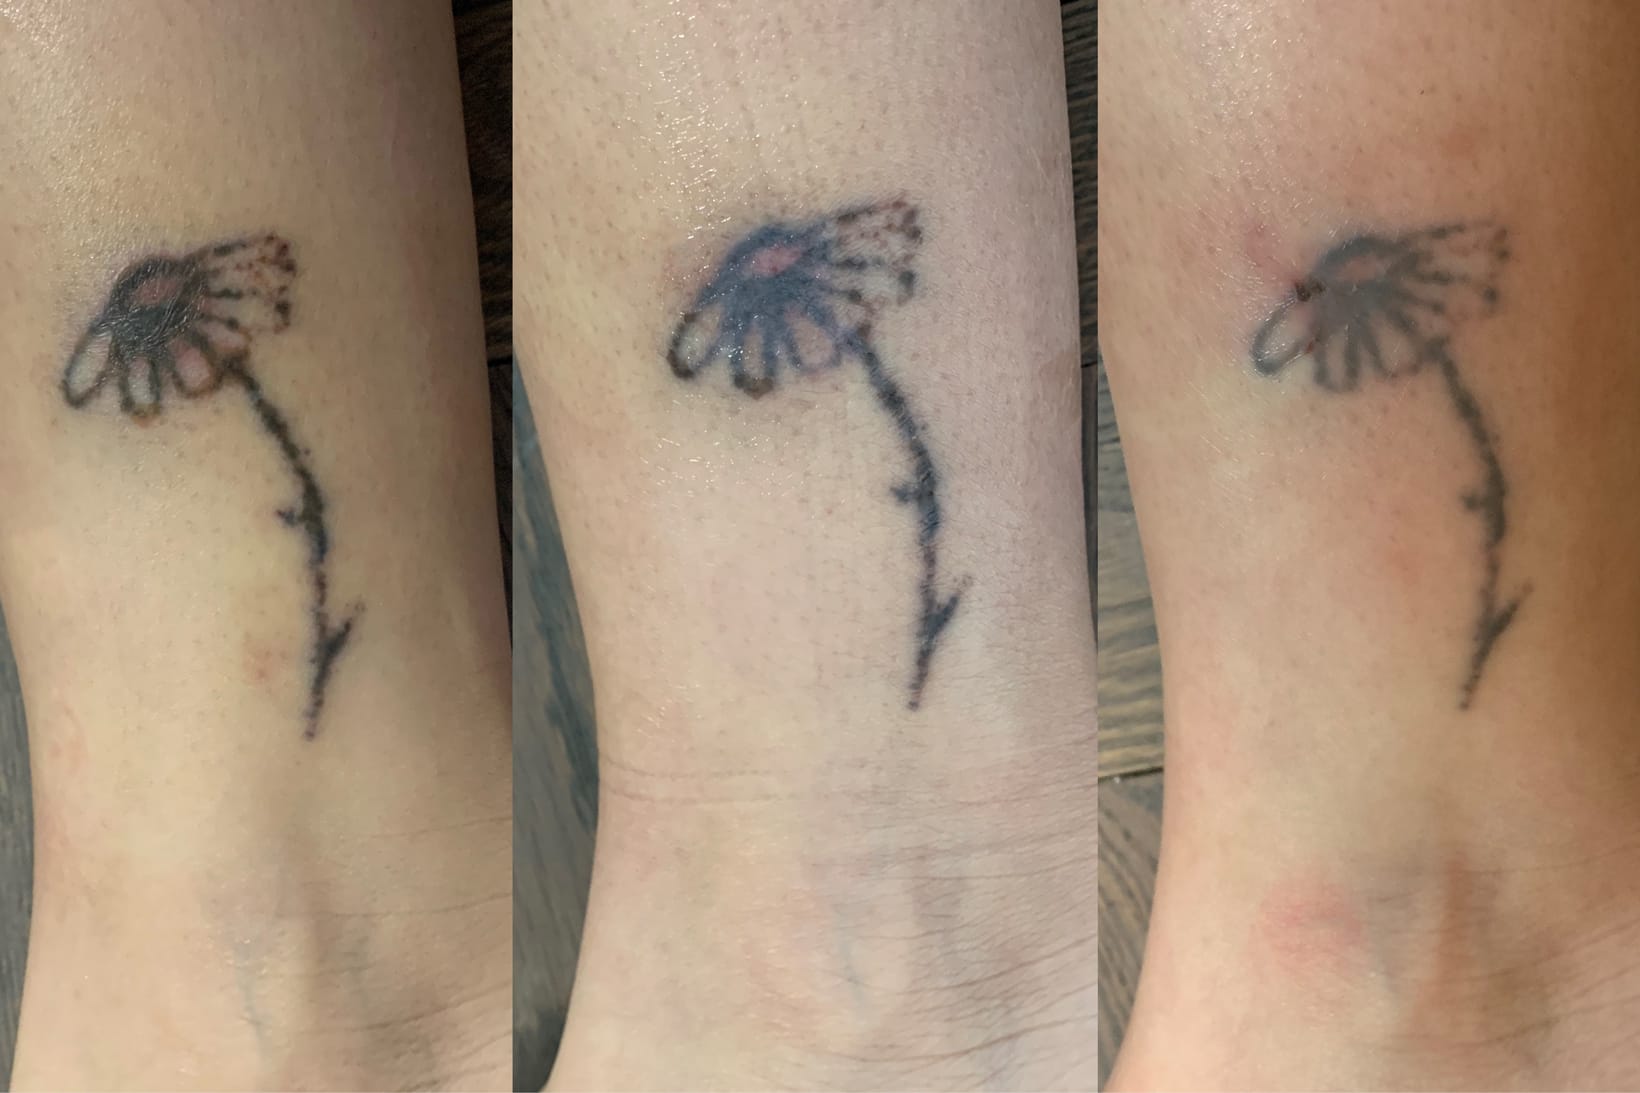 Laser Tattoo Removal: How Long Does It Take?